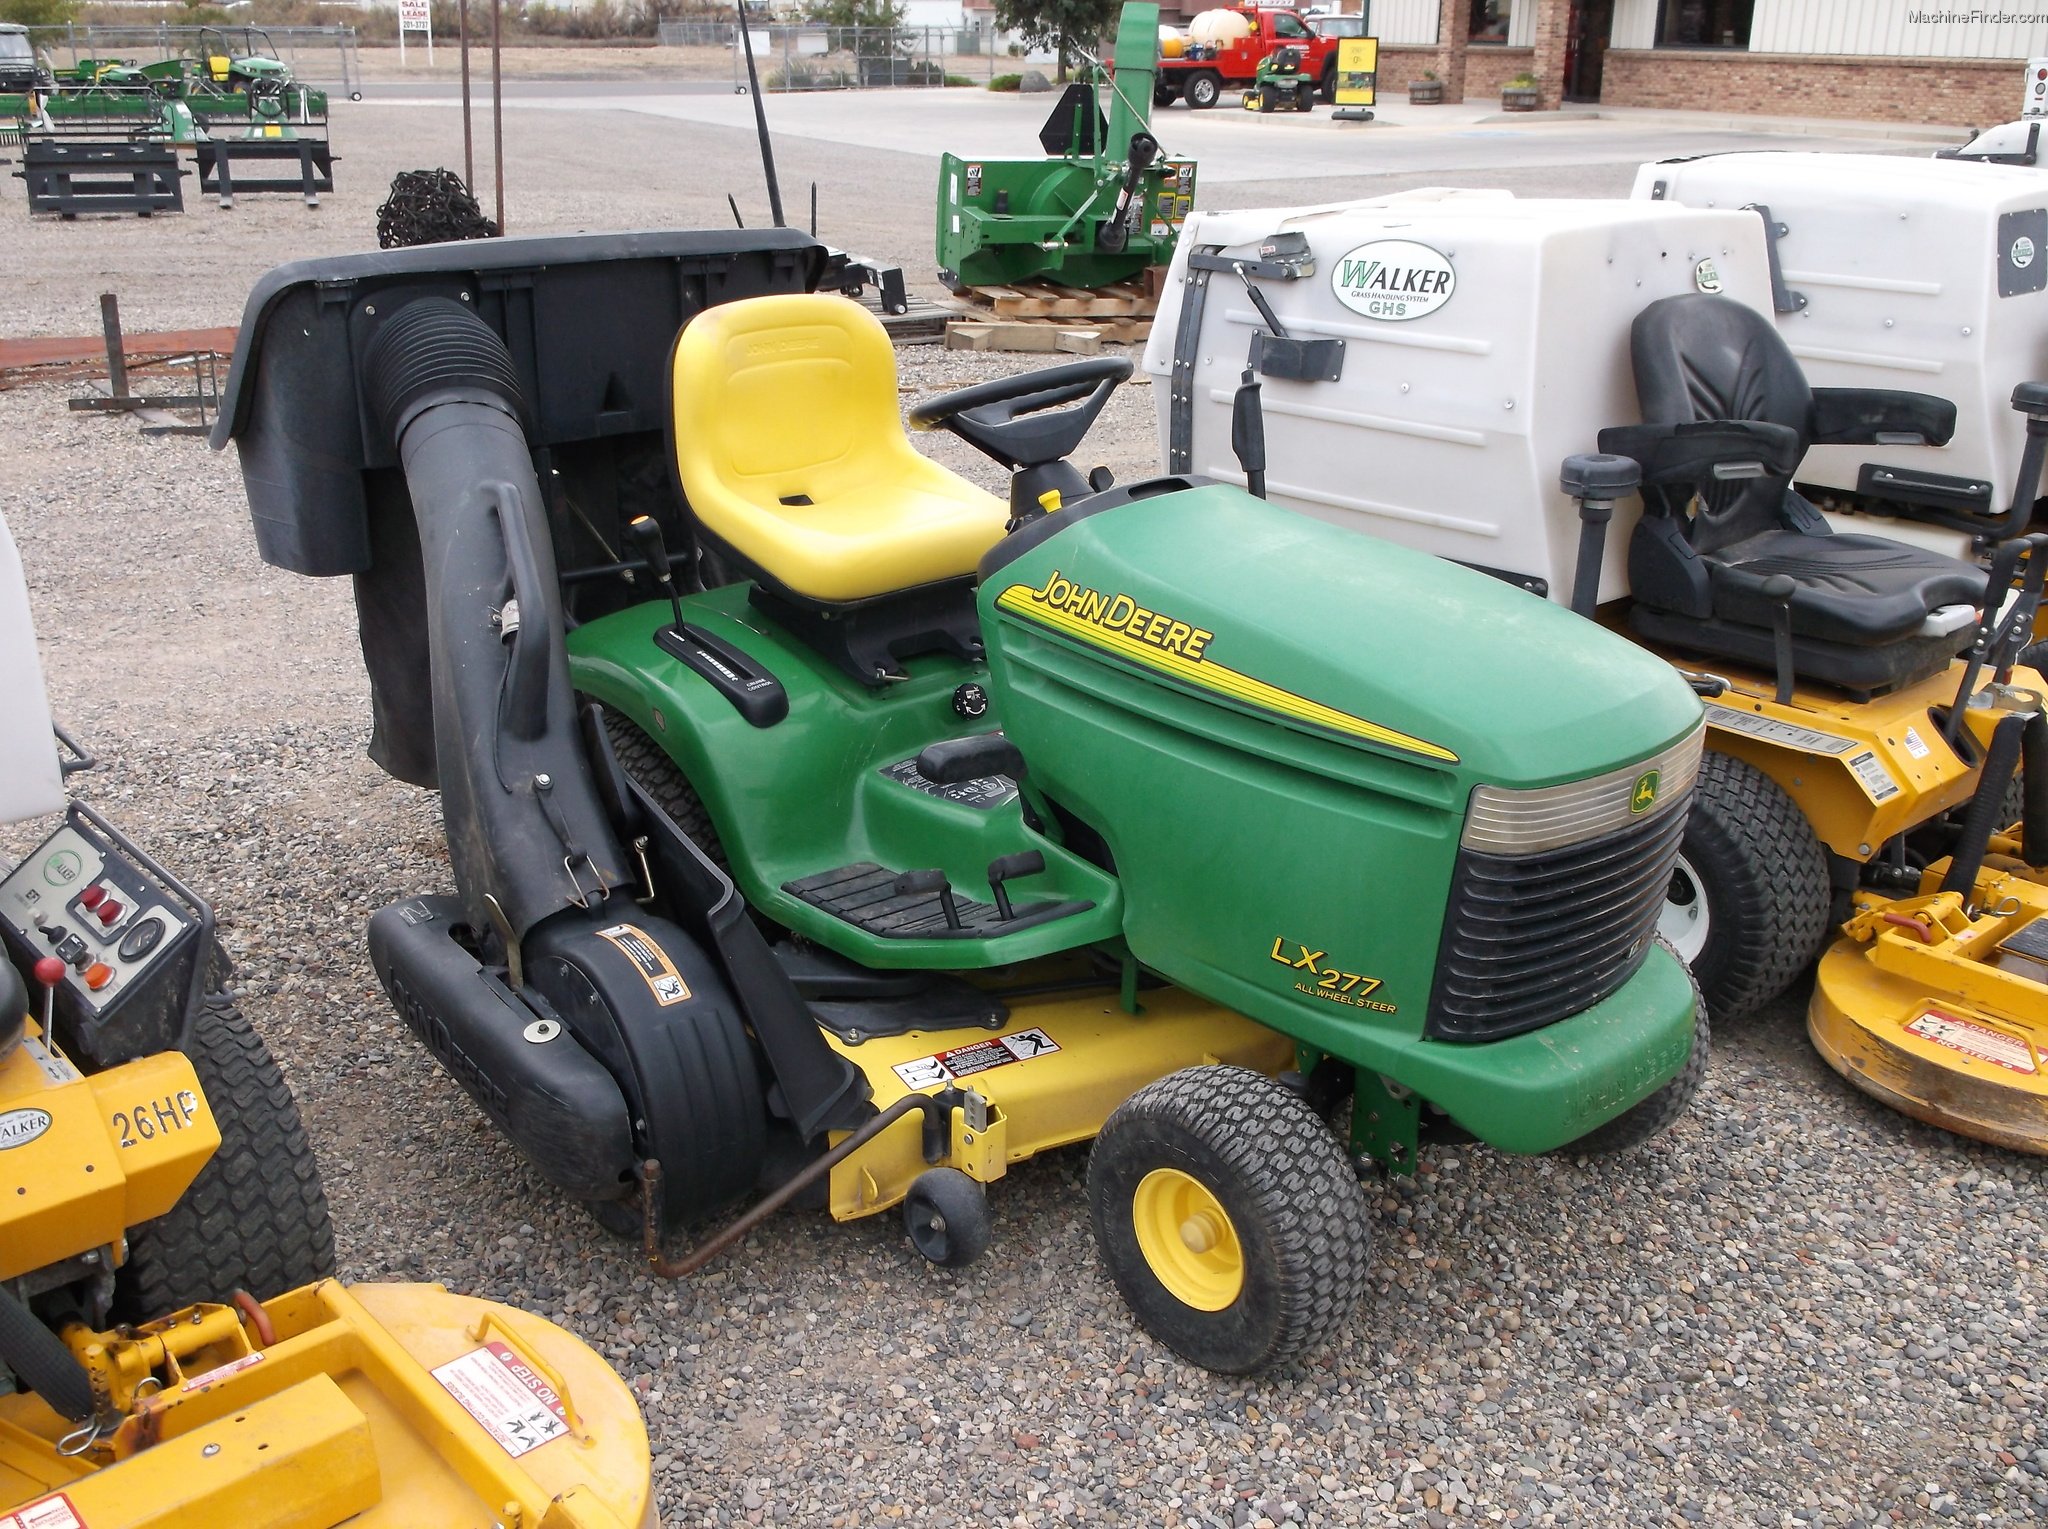 2003 John Deere Lx277 Lawn And Garden And Commercial Mowing John Deere